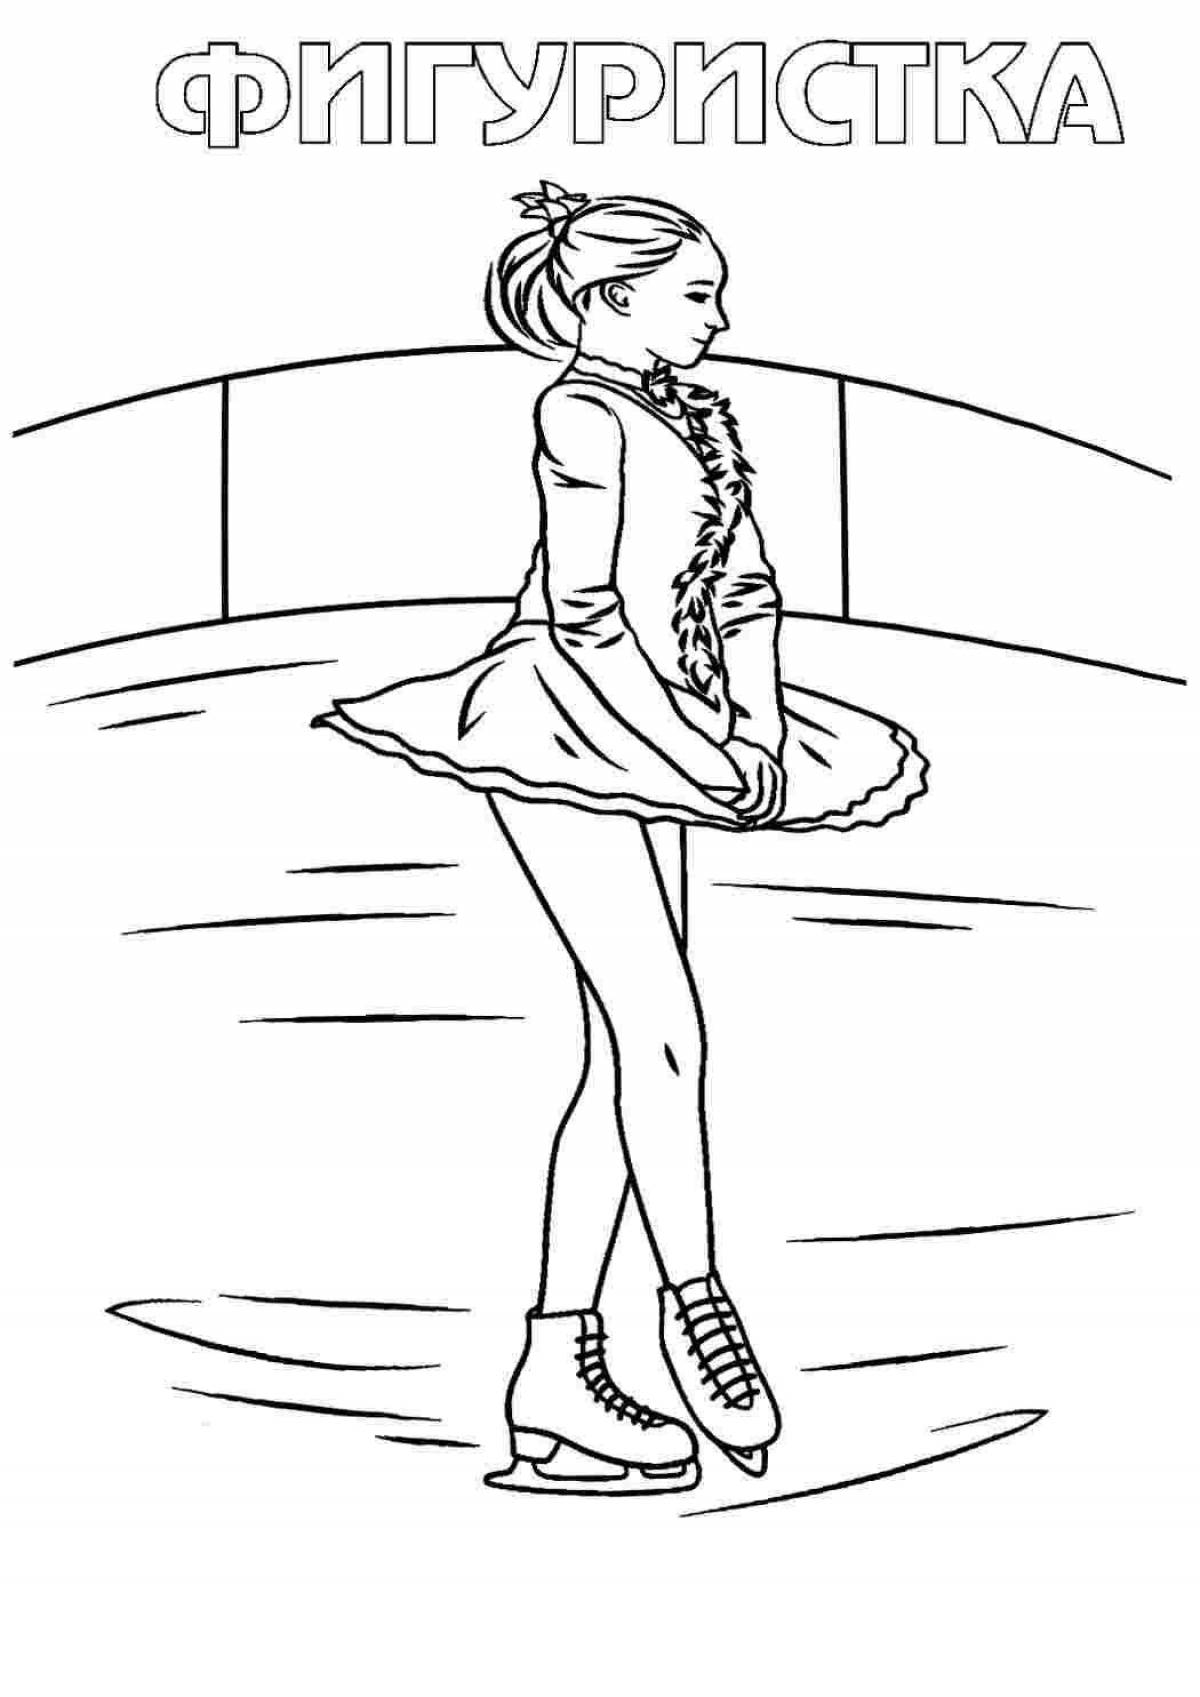 Colorful figure skater coloring book for kids